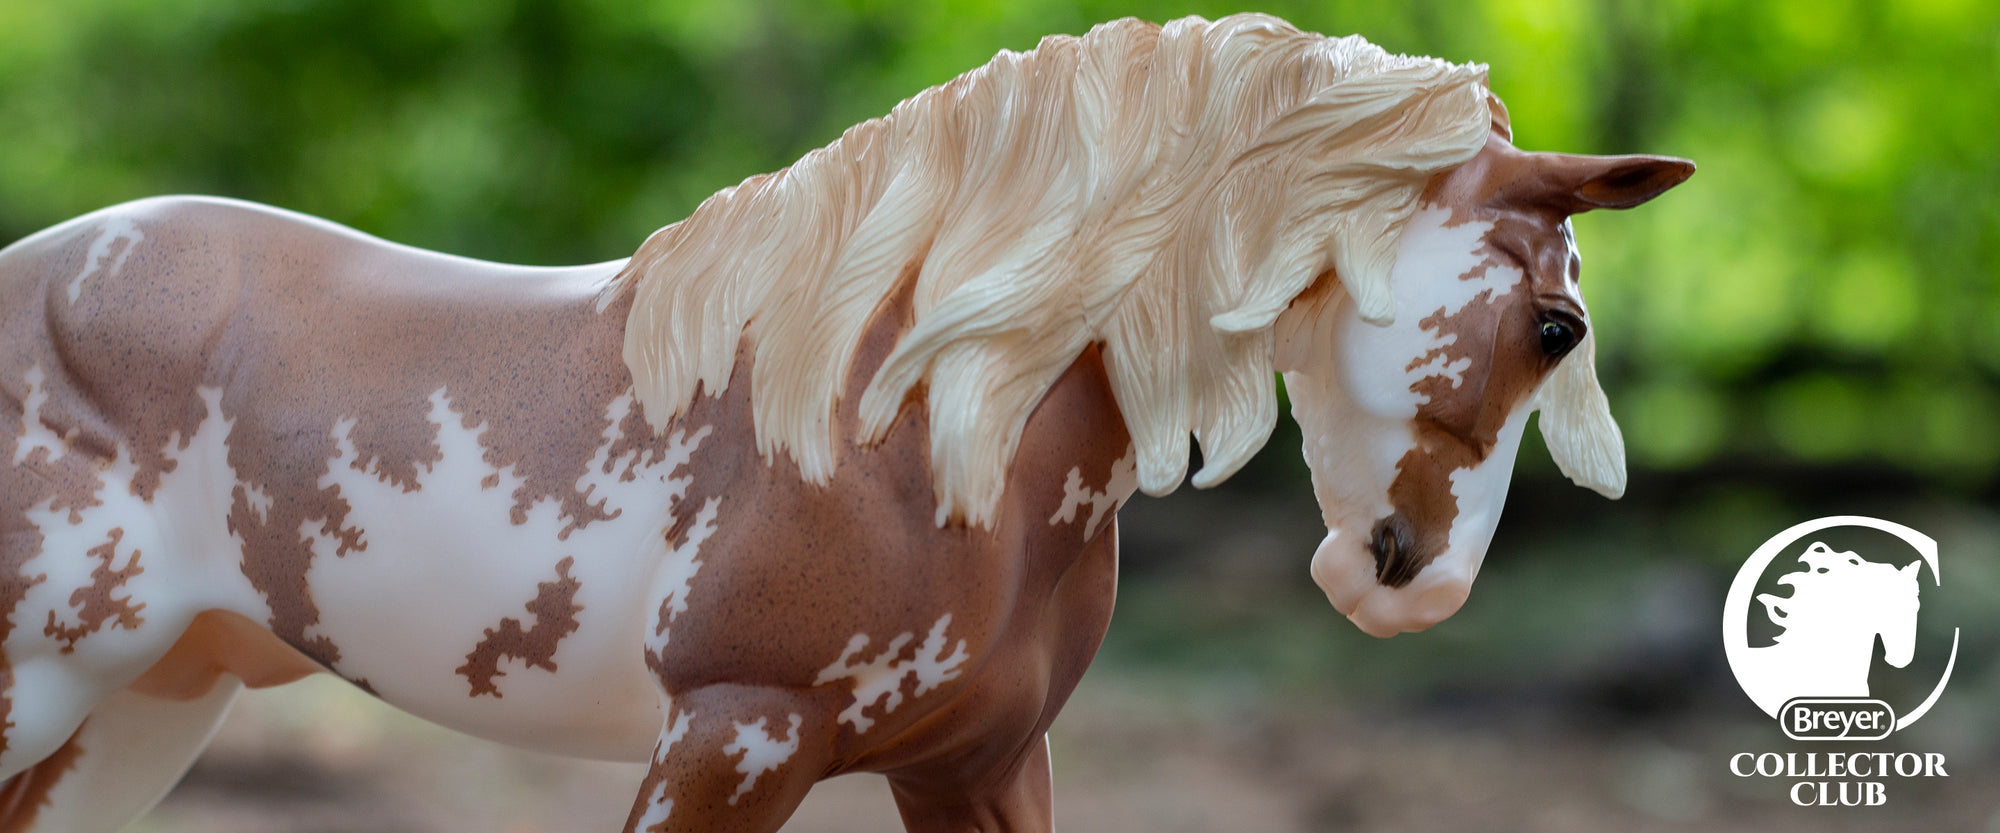 Join the Breyer Collector Club, showing exclusive collector model "Heath"